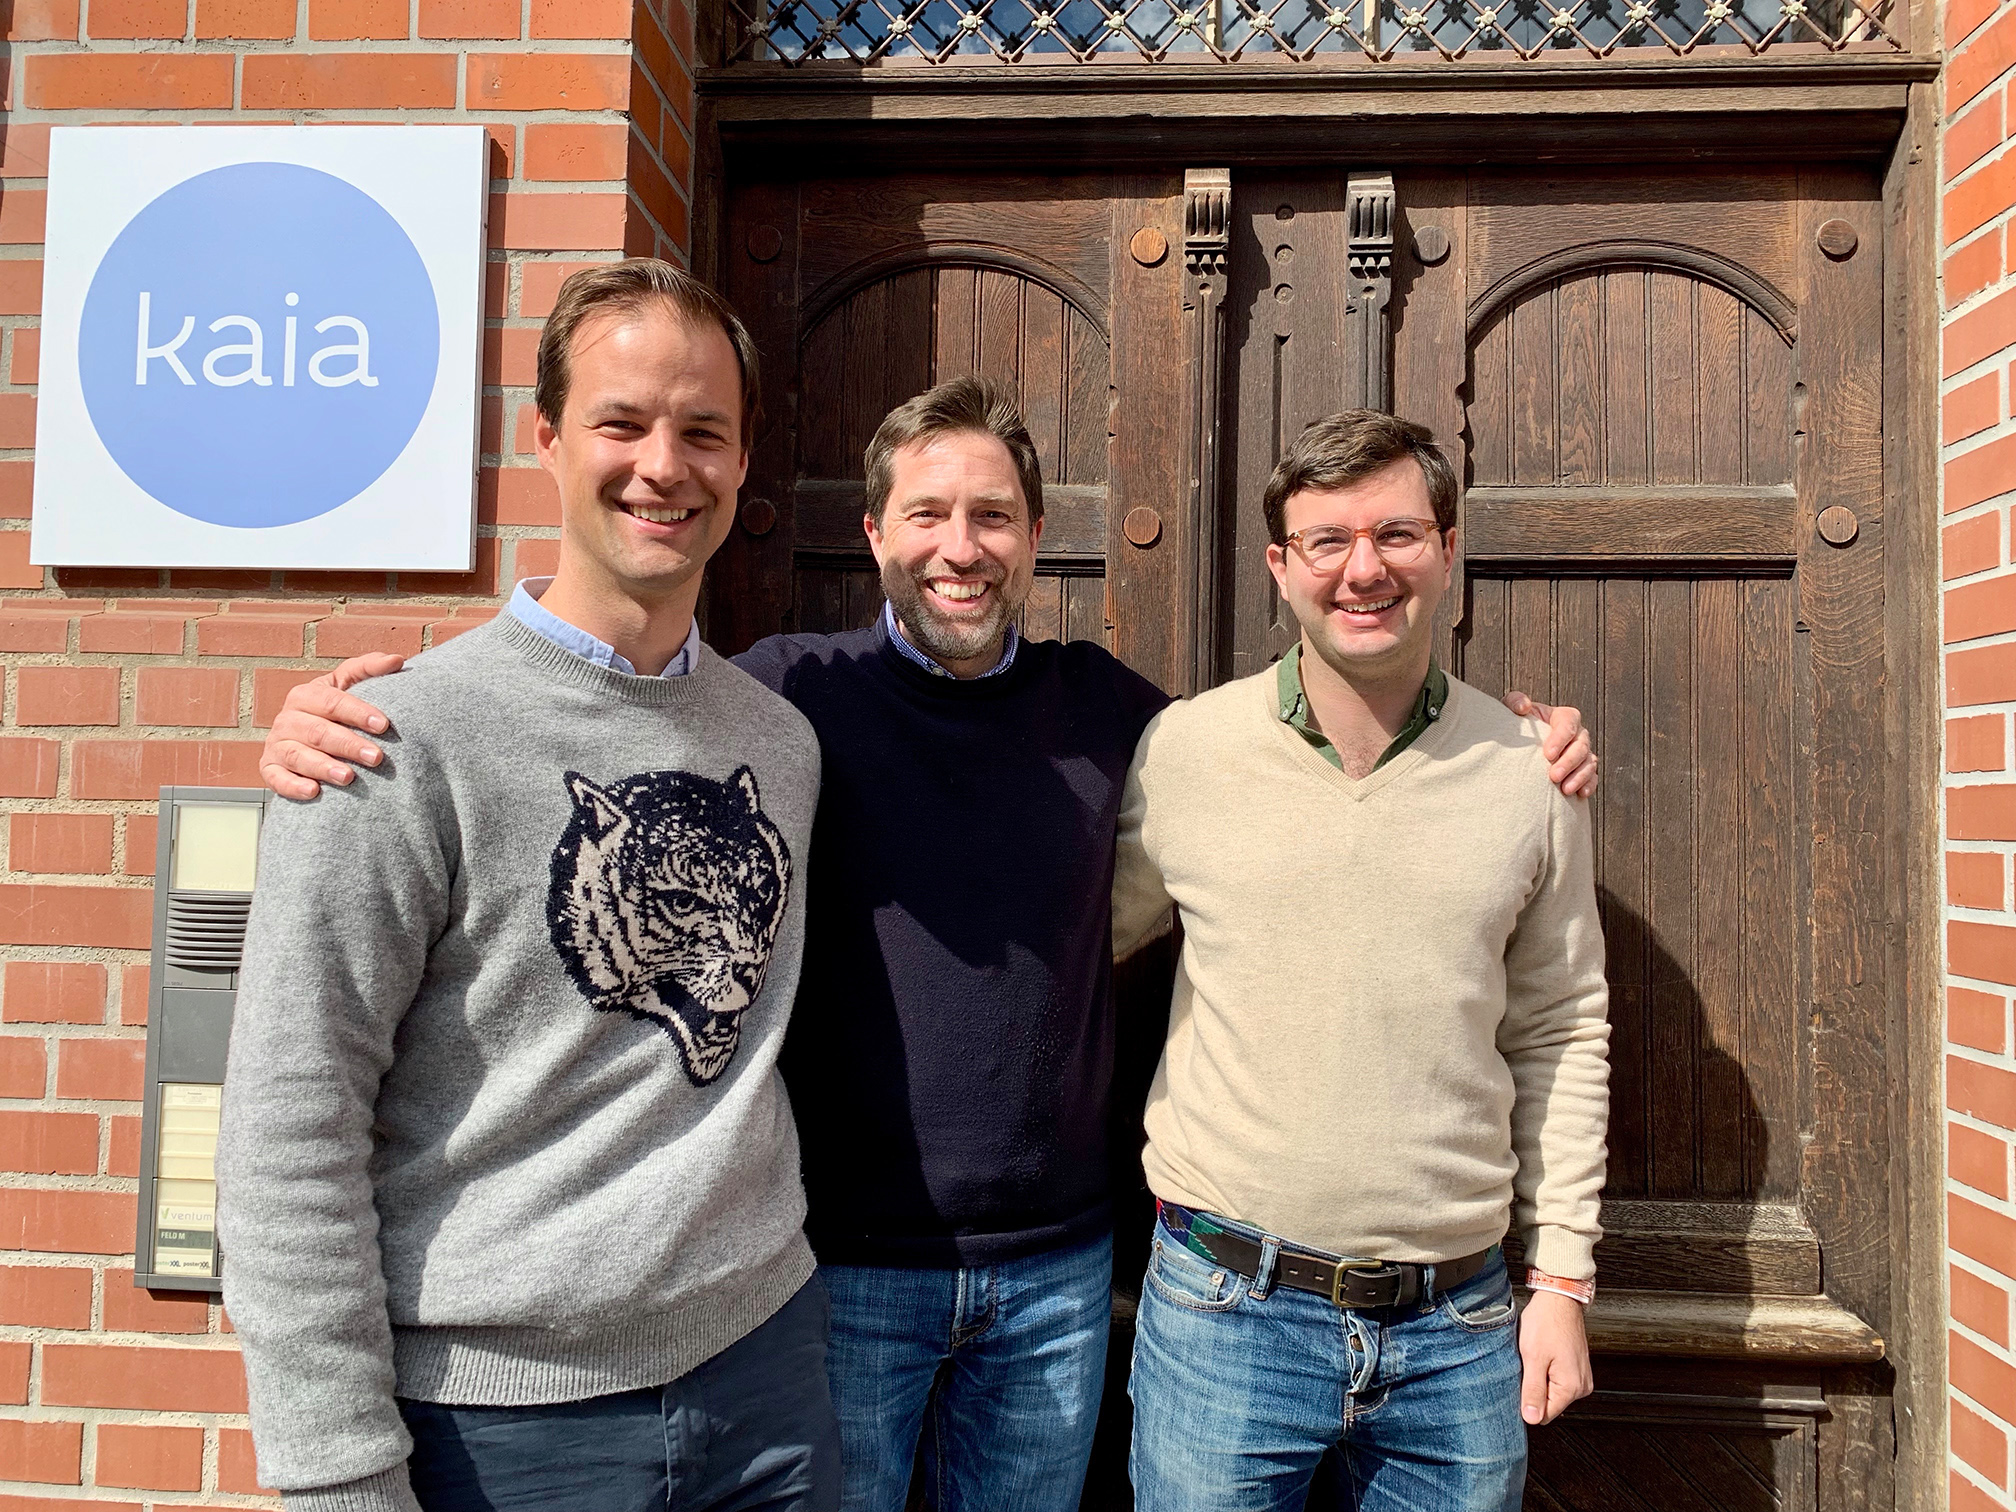 Florian Huber (center) with Konstantin Mehl/Manuel Thurner (Co-Founders of Foodora and Kaia Health)